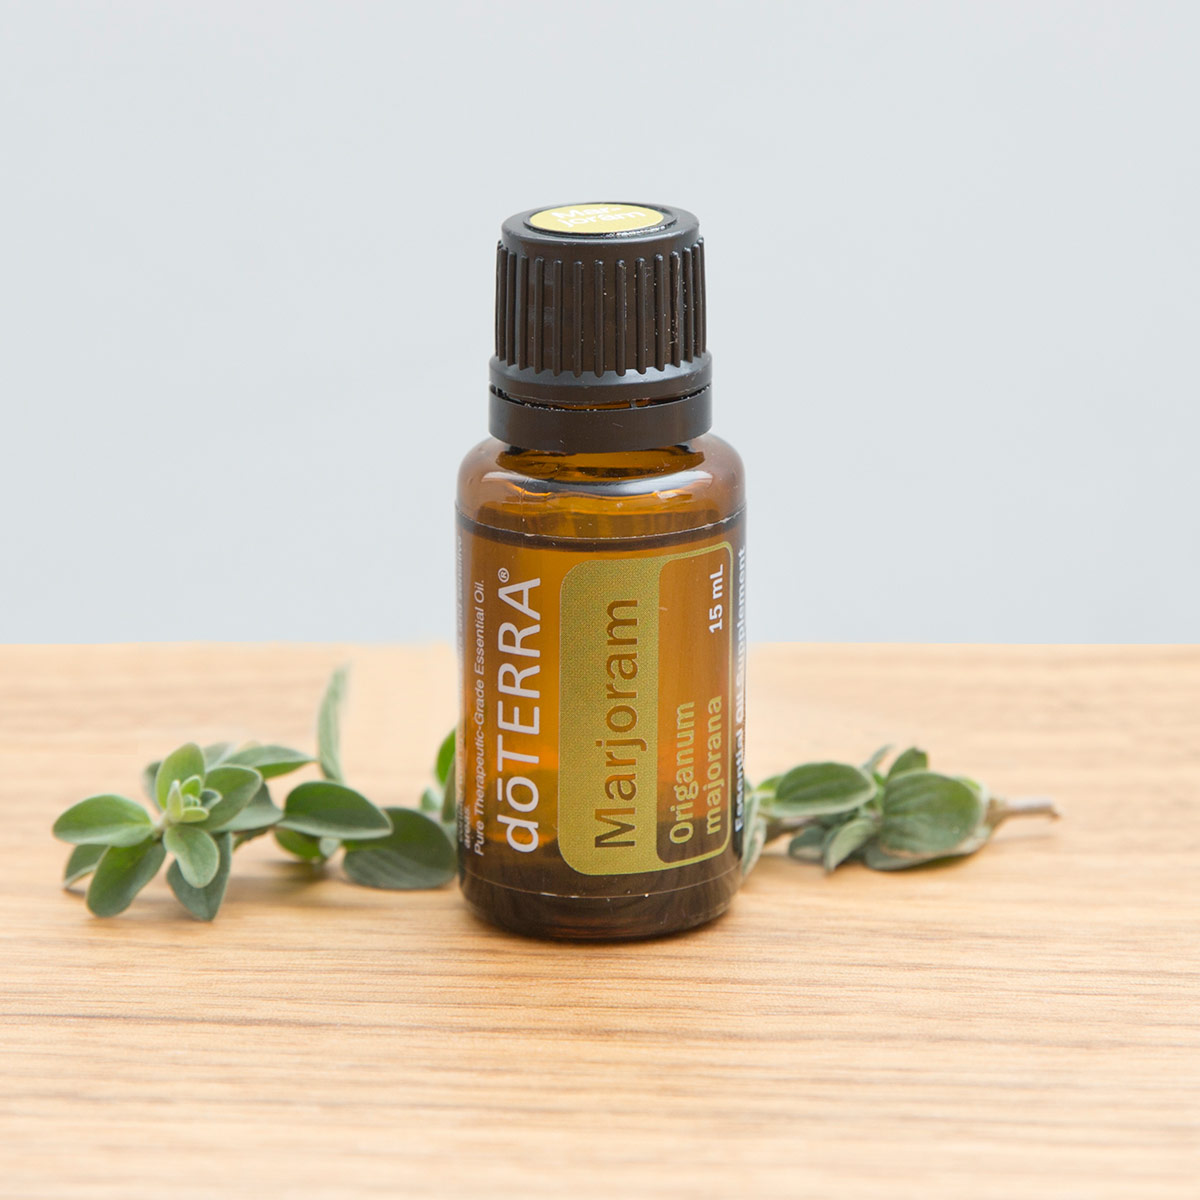 Marjoram Oil Uses and Benefits